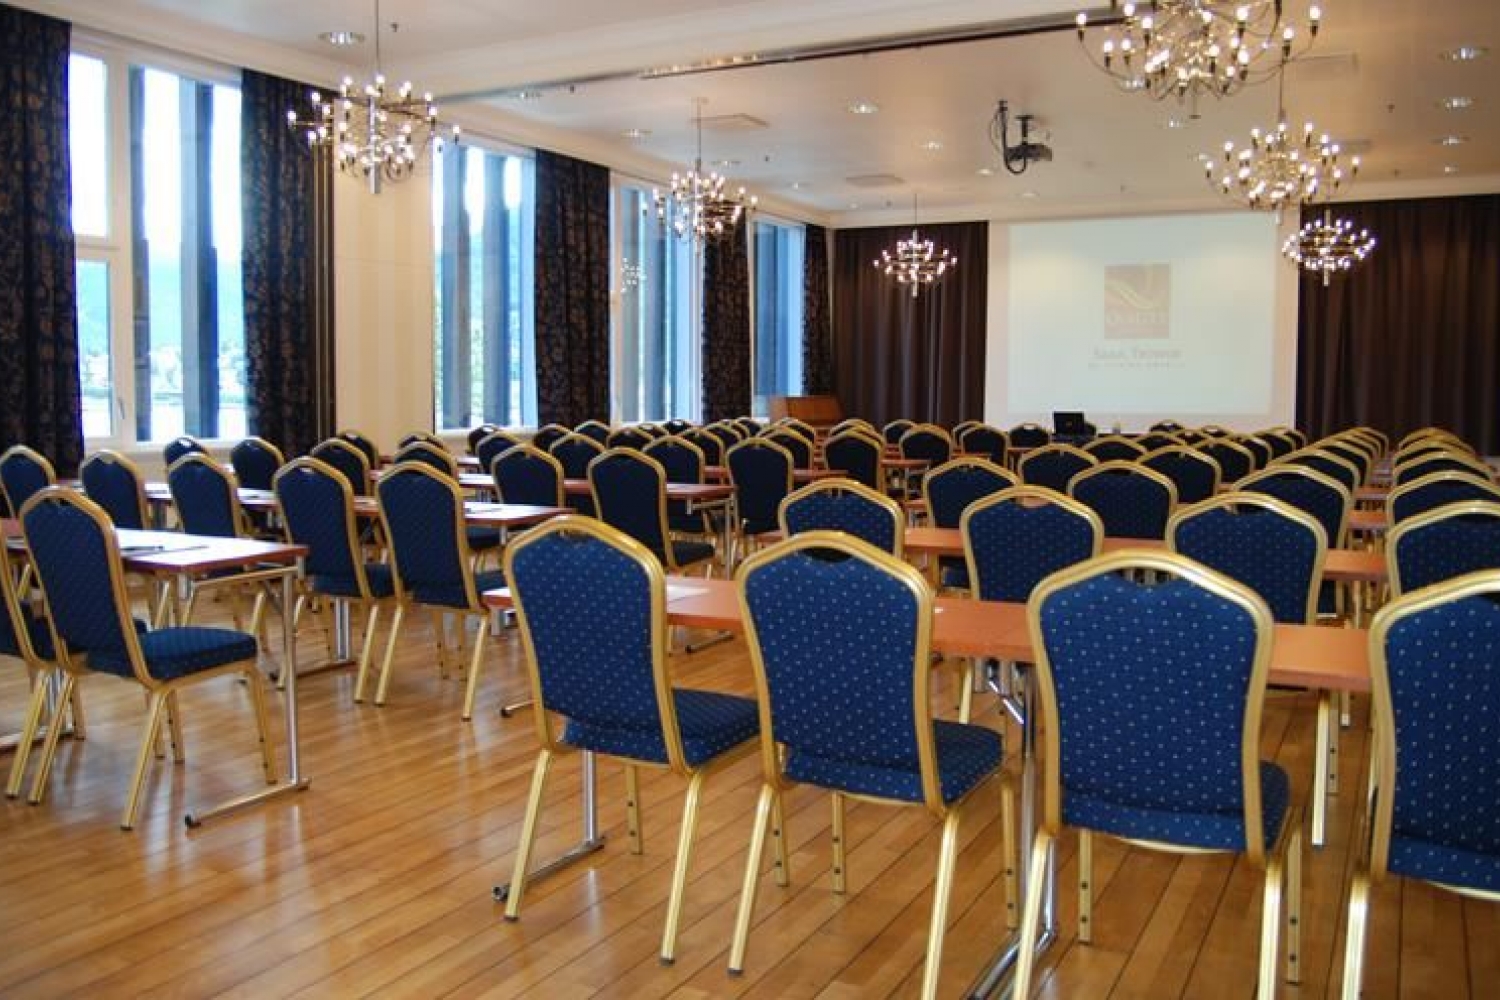 7 conference and banqueting rooms with a capacity of 180 people in the largest hall. Coffee/tea, fruits, cakes, ice cream and popcorn are available to all of our conference participants.